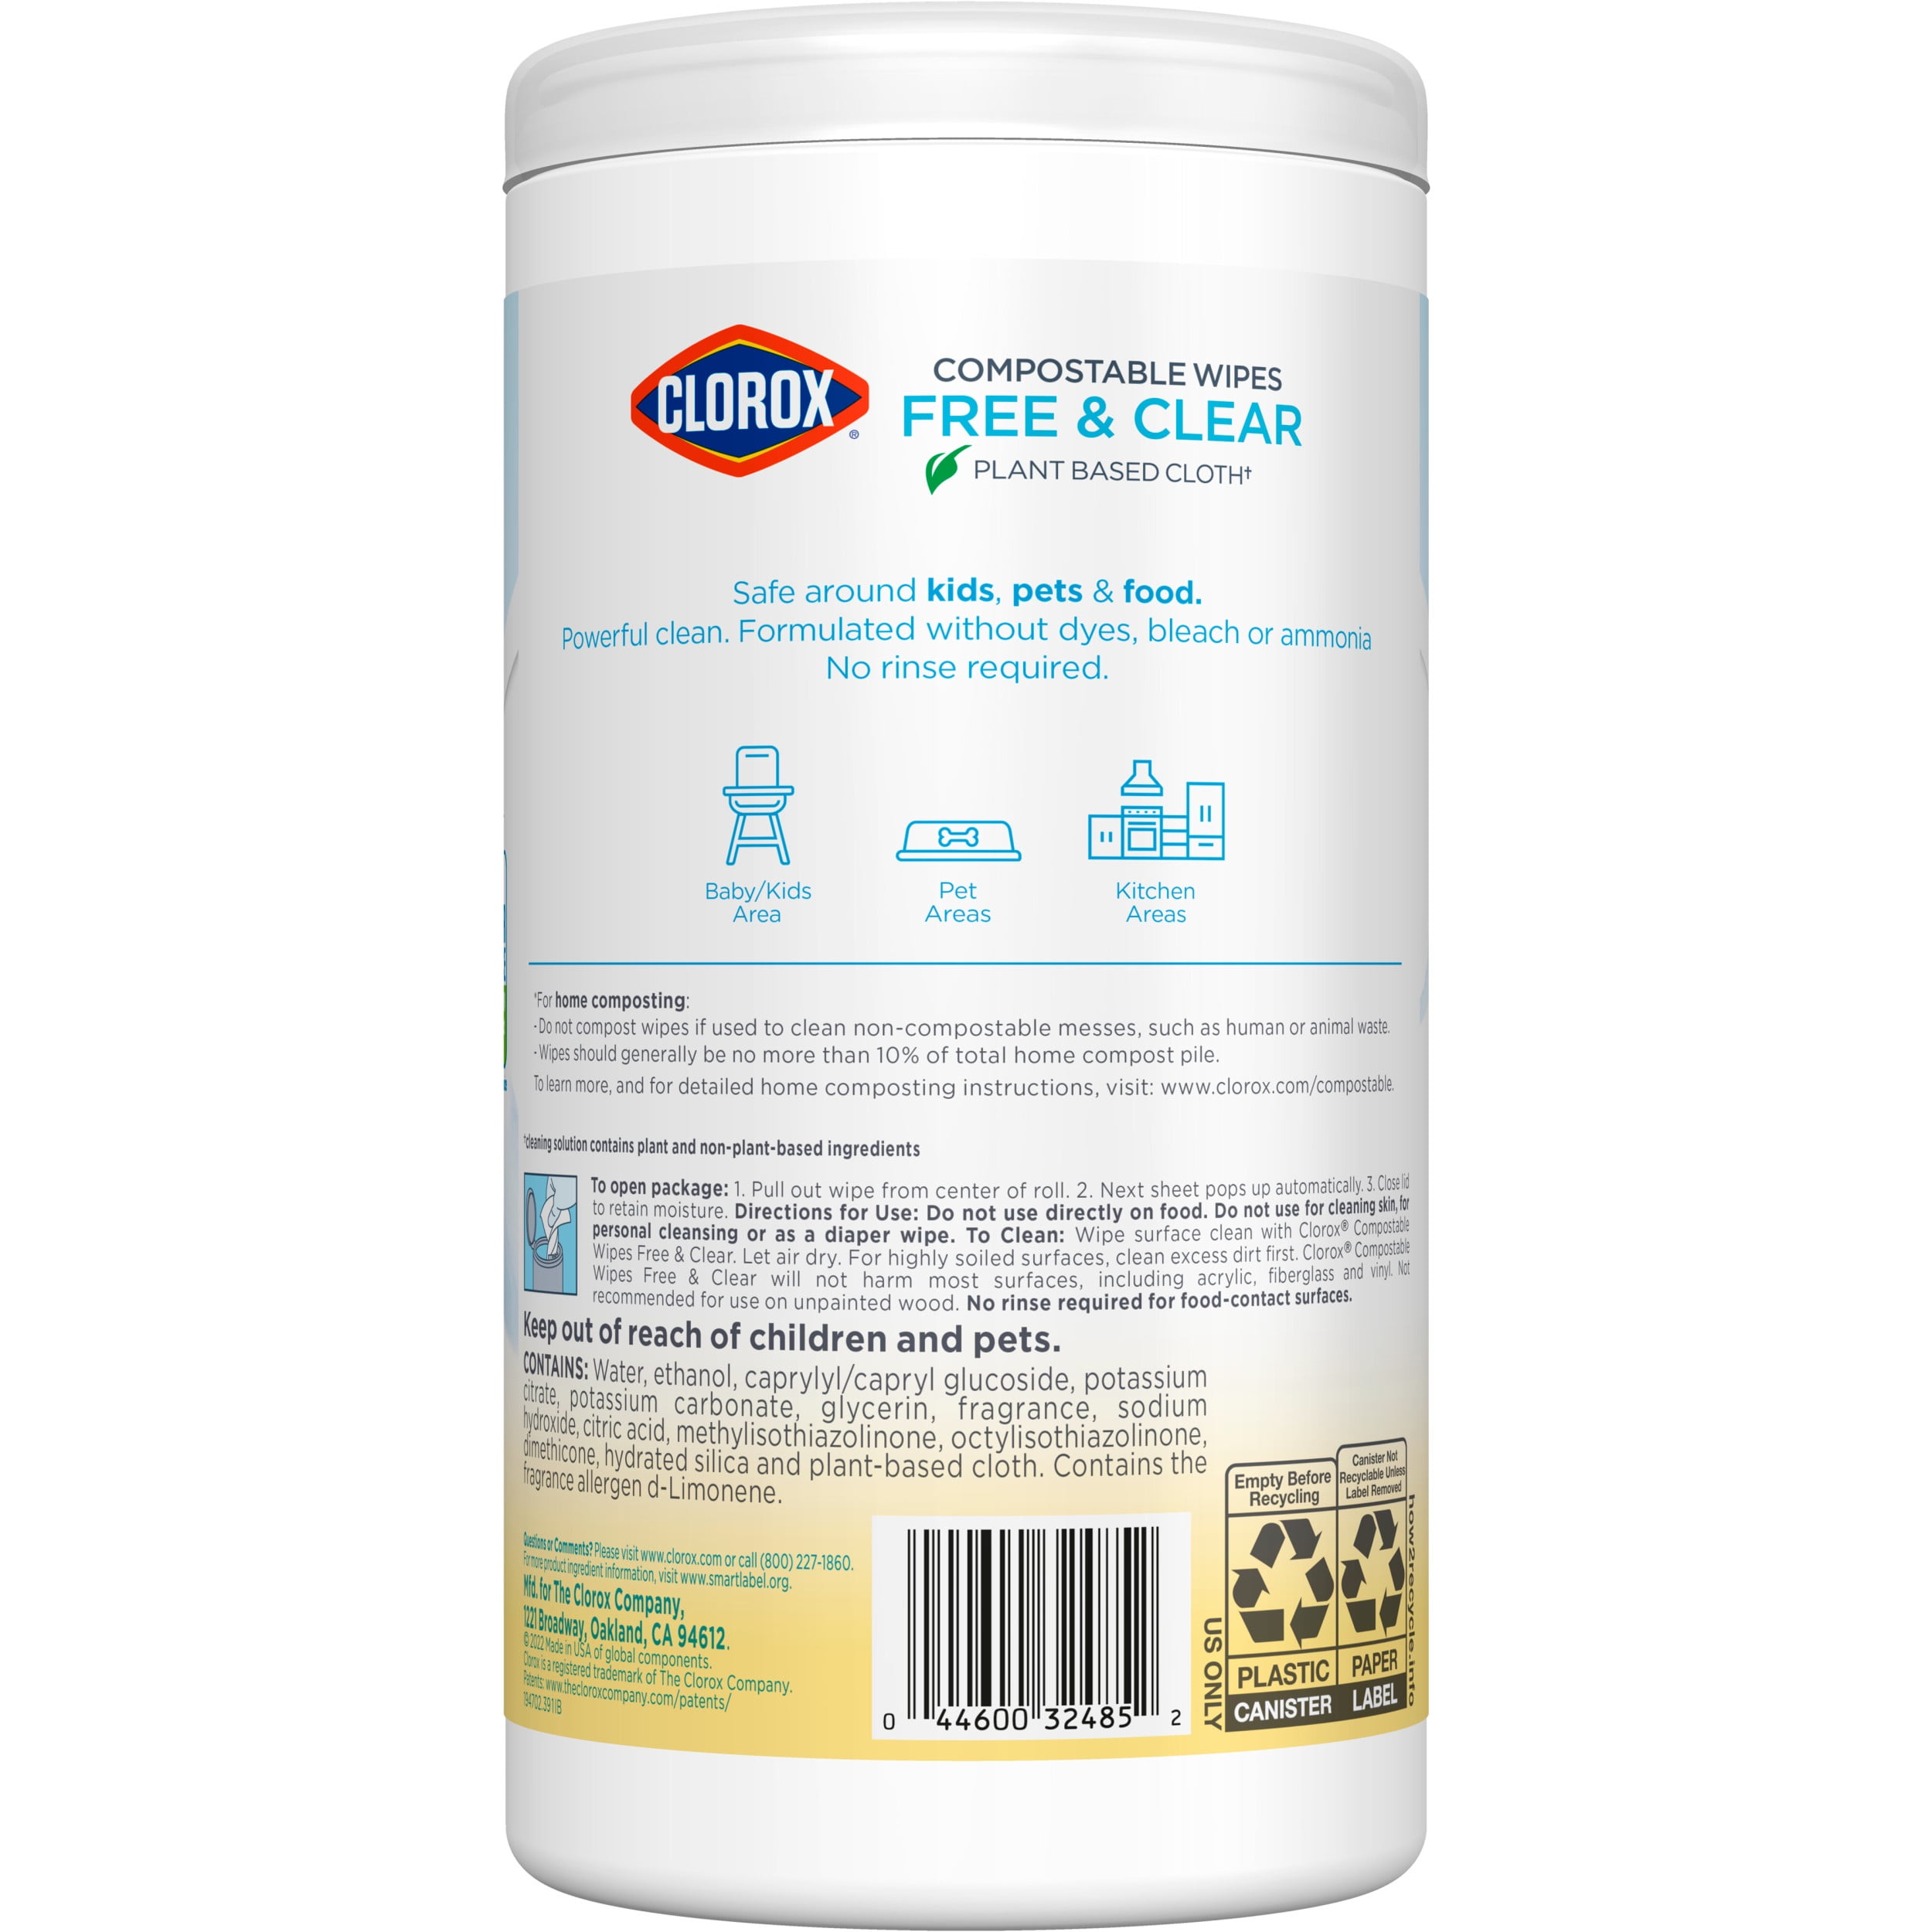 Clorox Cleaning Wipes, Free & Clear, Compostable - 75 wet wipes [1 lb 0.9  oz (479 g)], Cleaning Wipes